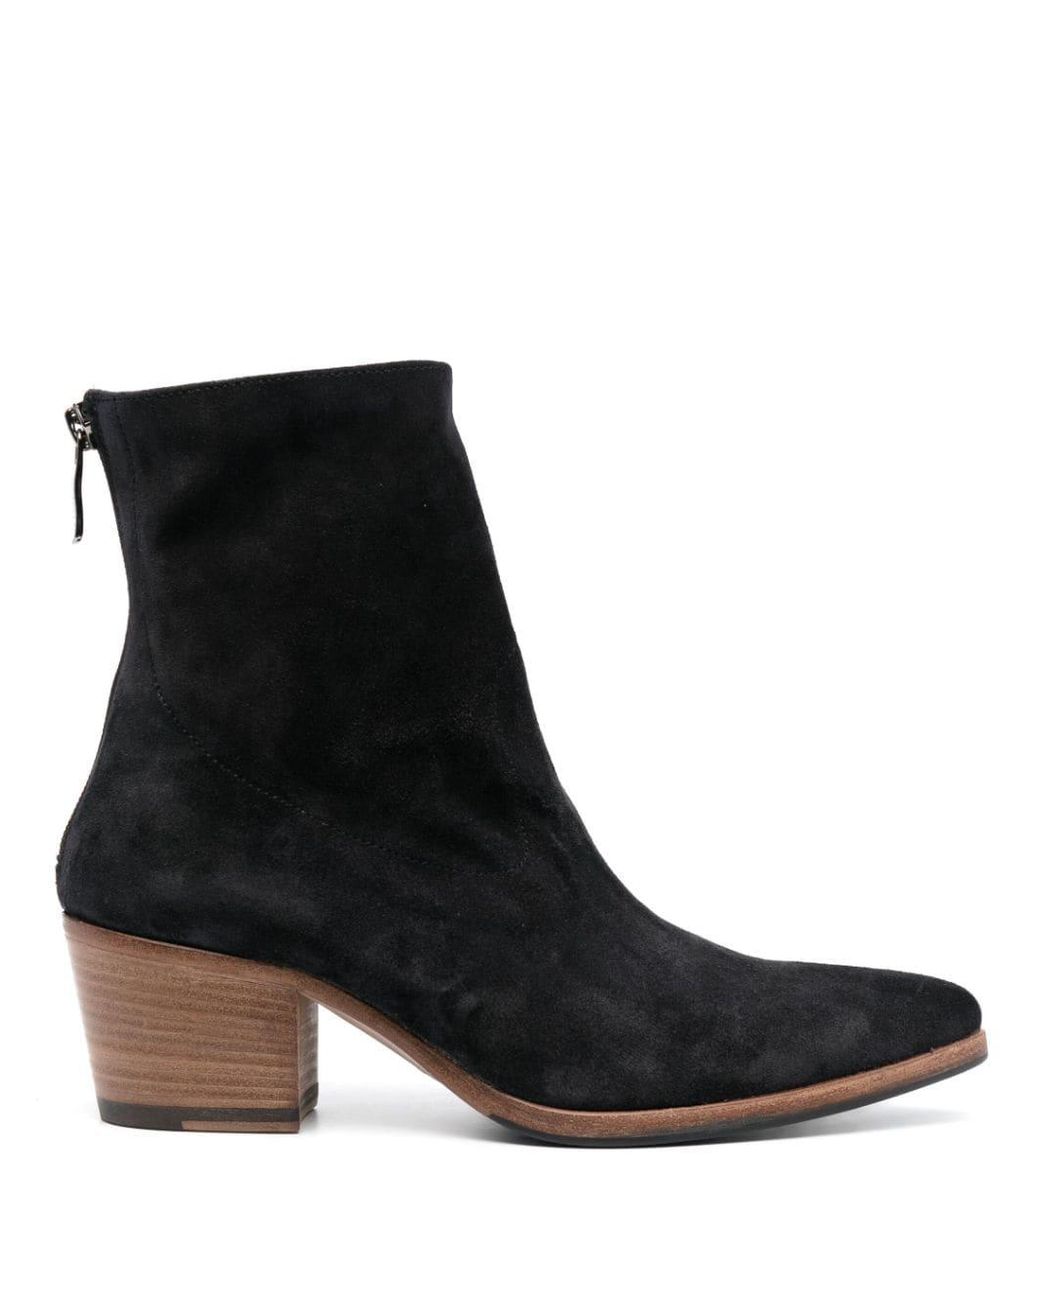 Alberto Fasciani 60mm Suede Leather Boots in Black | Lyst UK